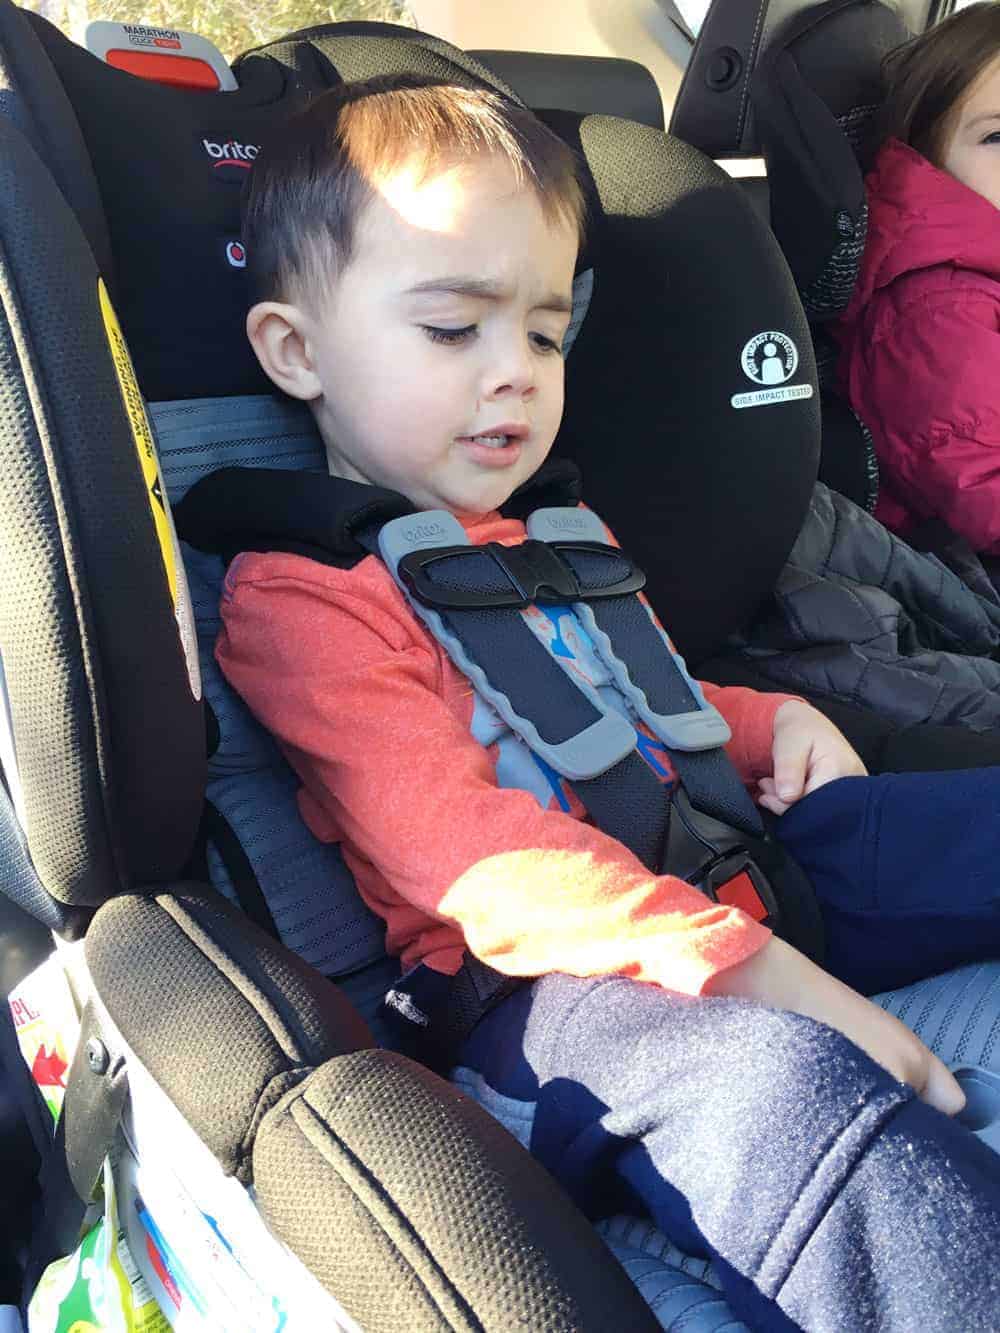 Britax ClickTight Convertible Car Seat Review - Car Seats For The Littles